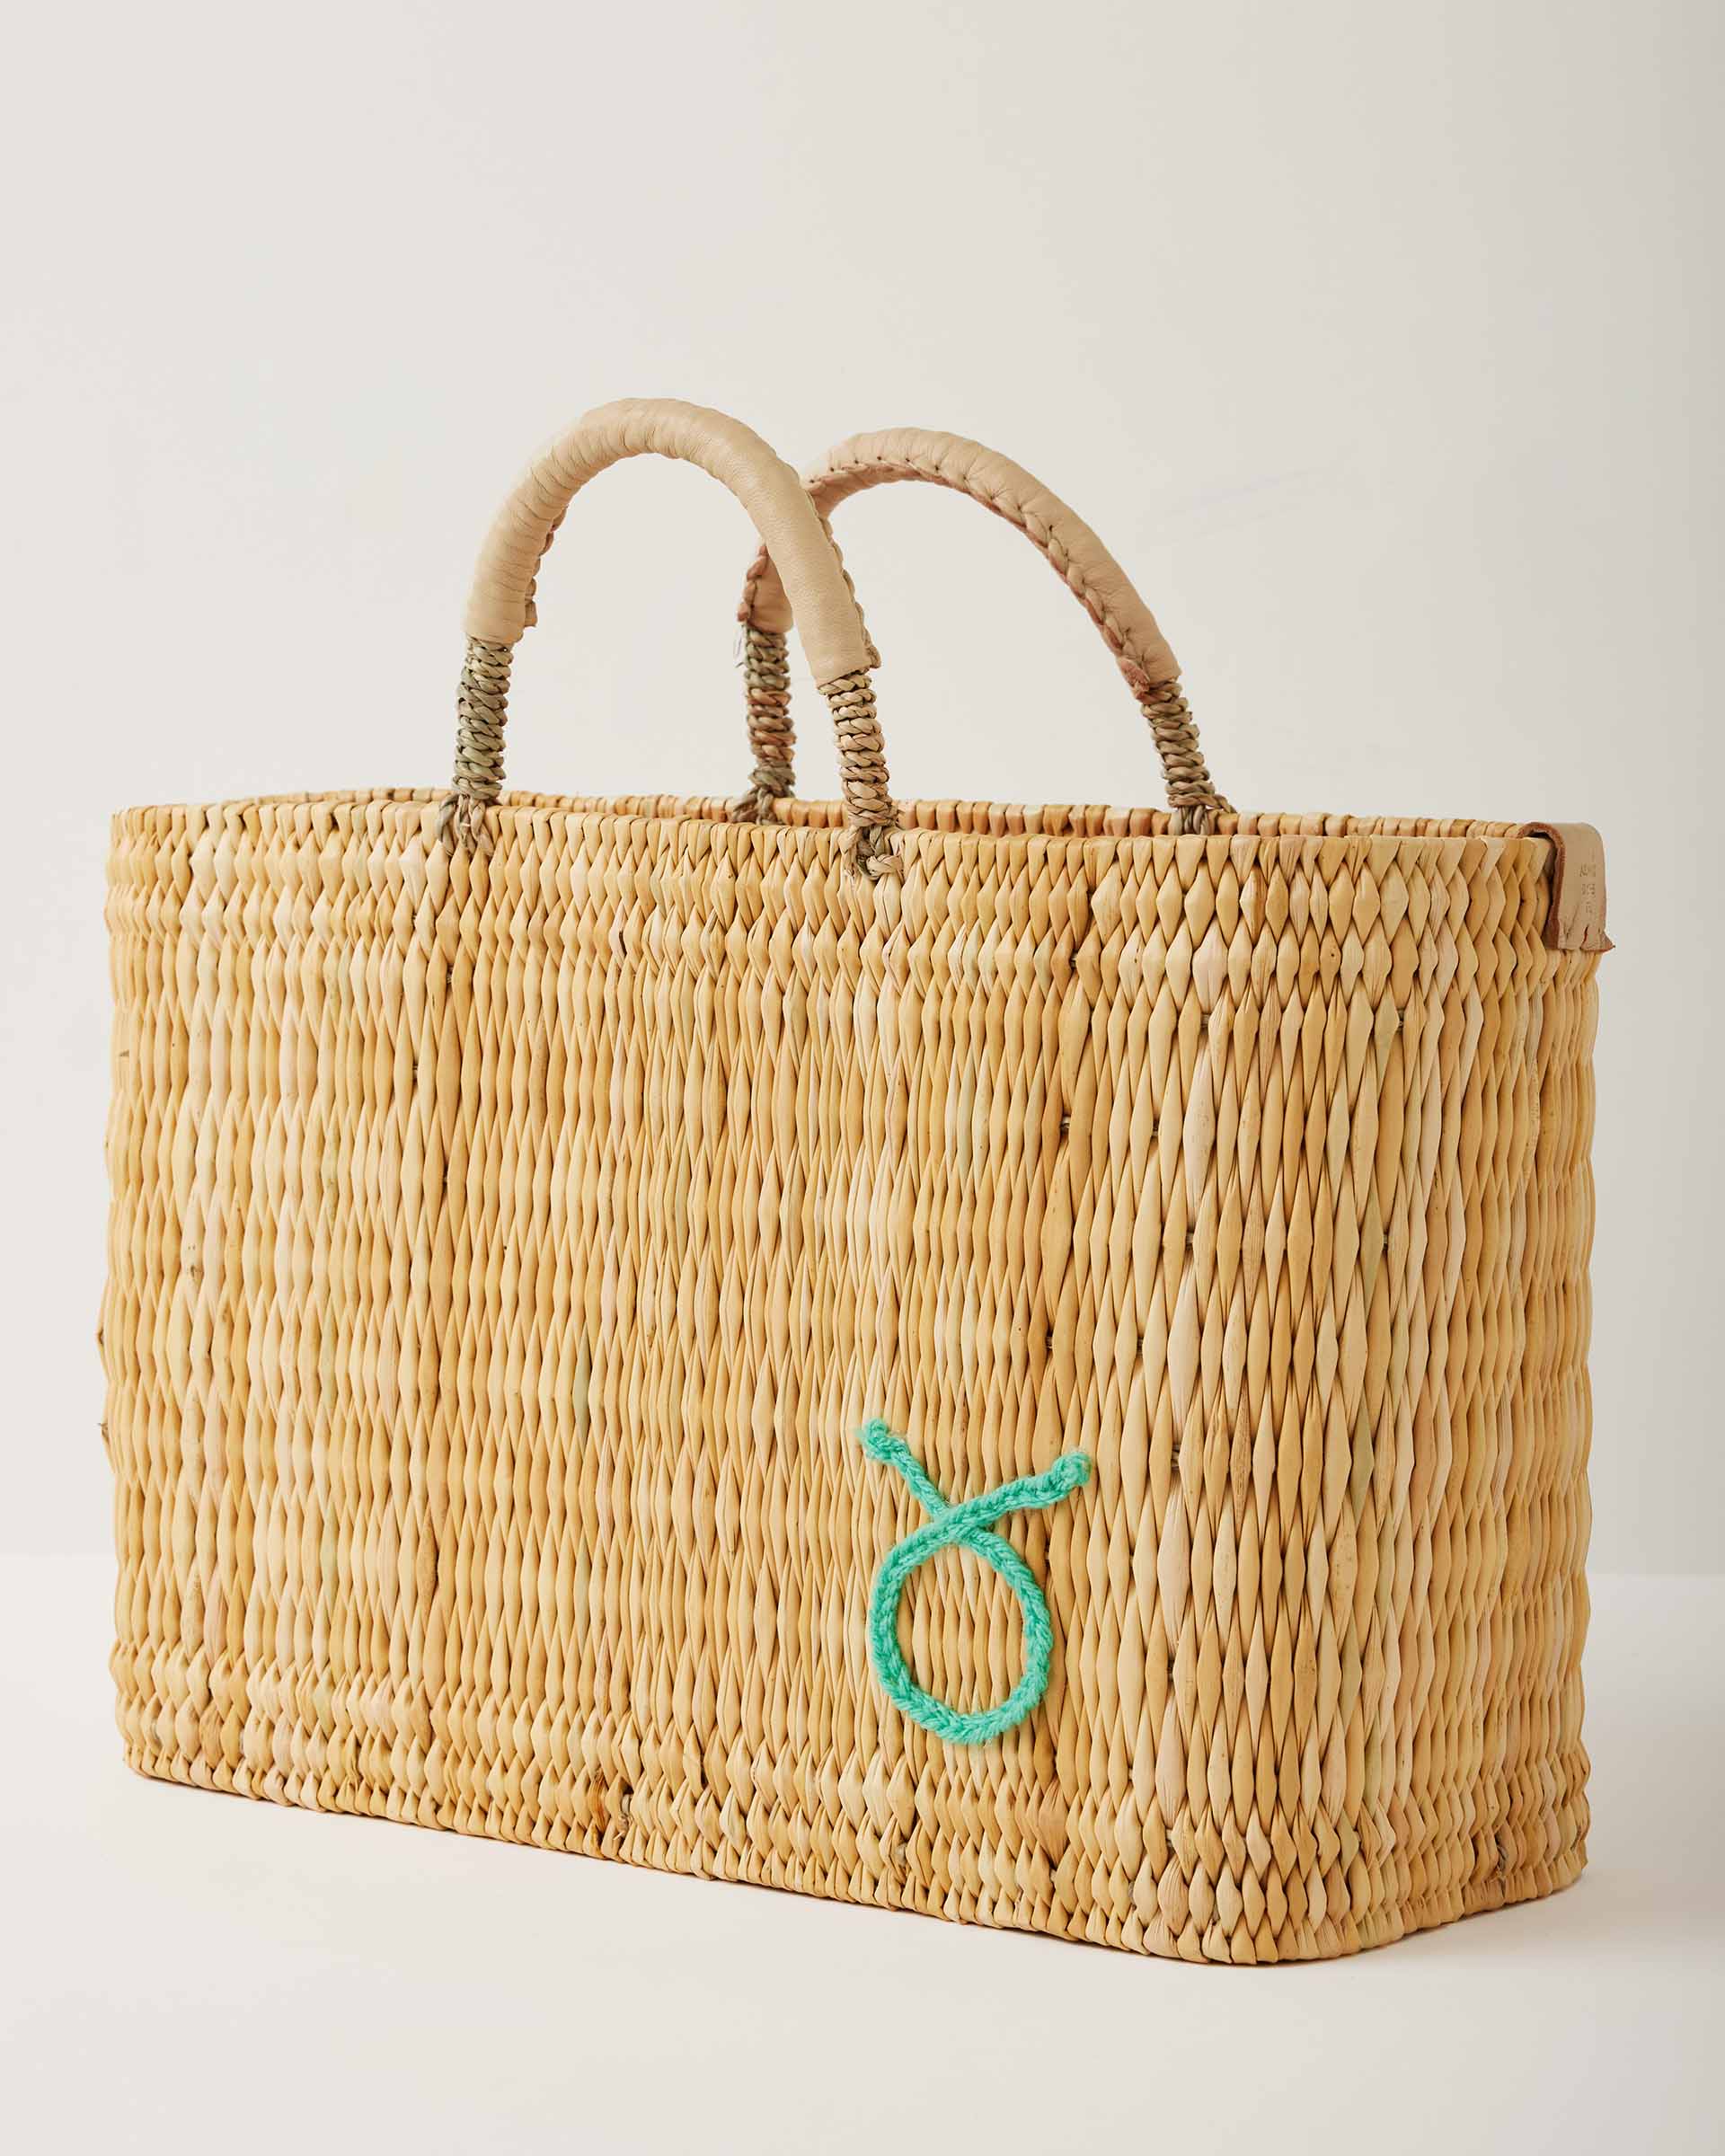 Market straw basket with tan leather handles and Taurus symbol embroidered in foam green